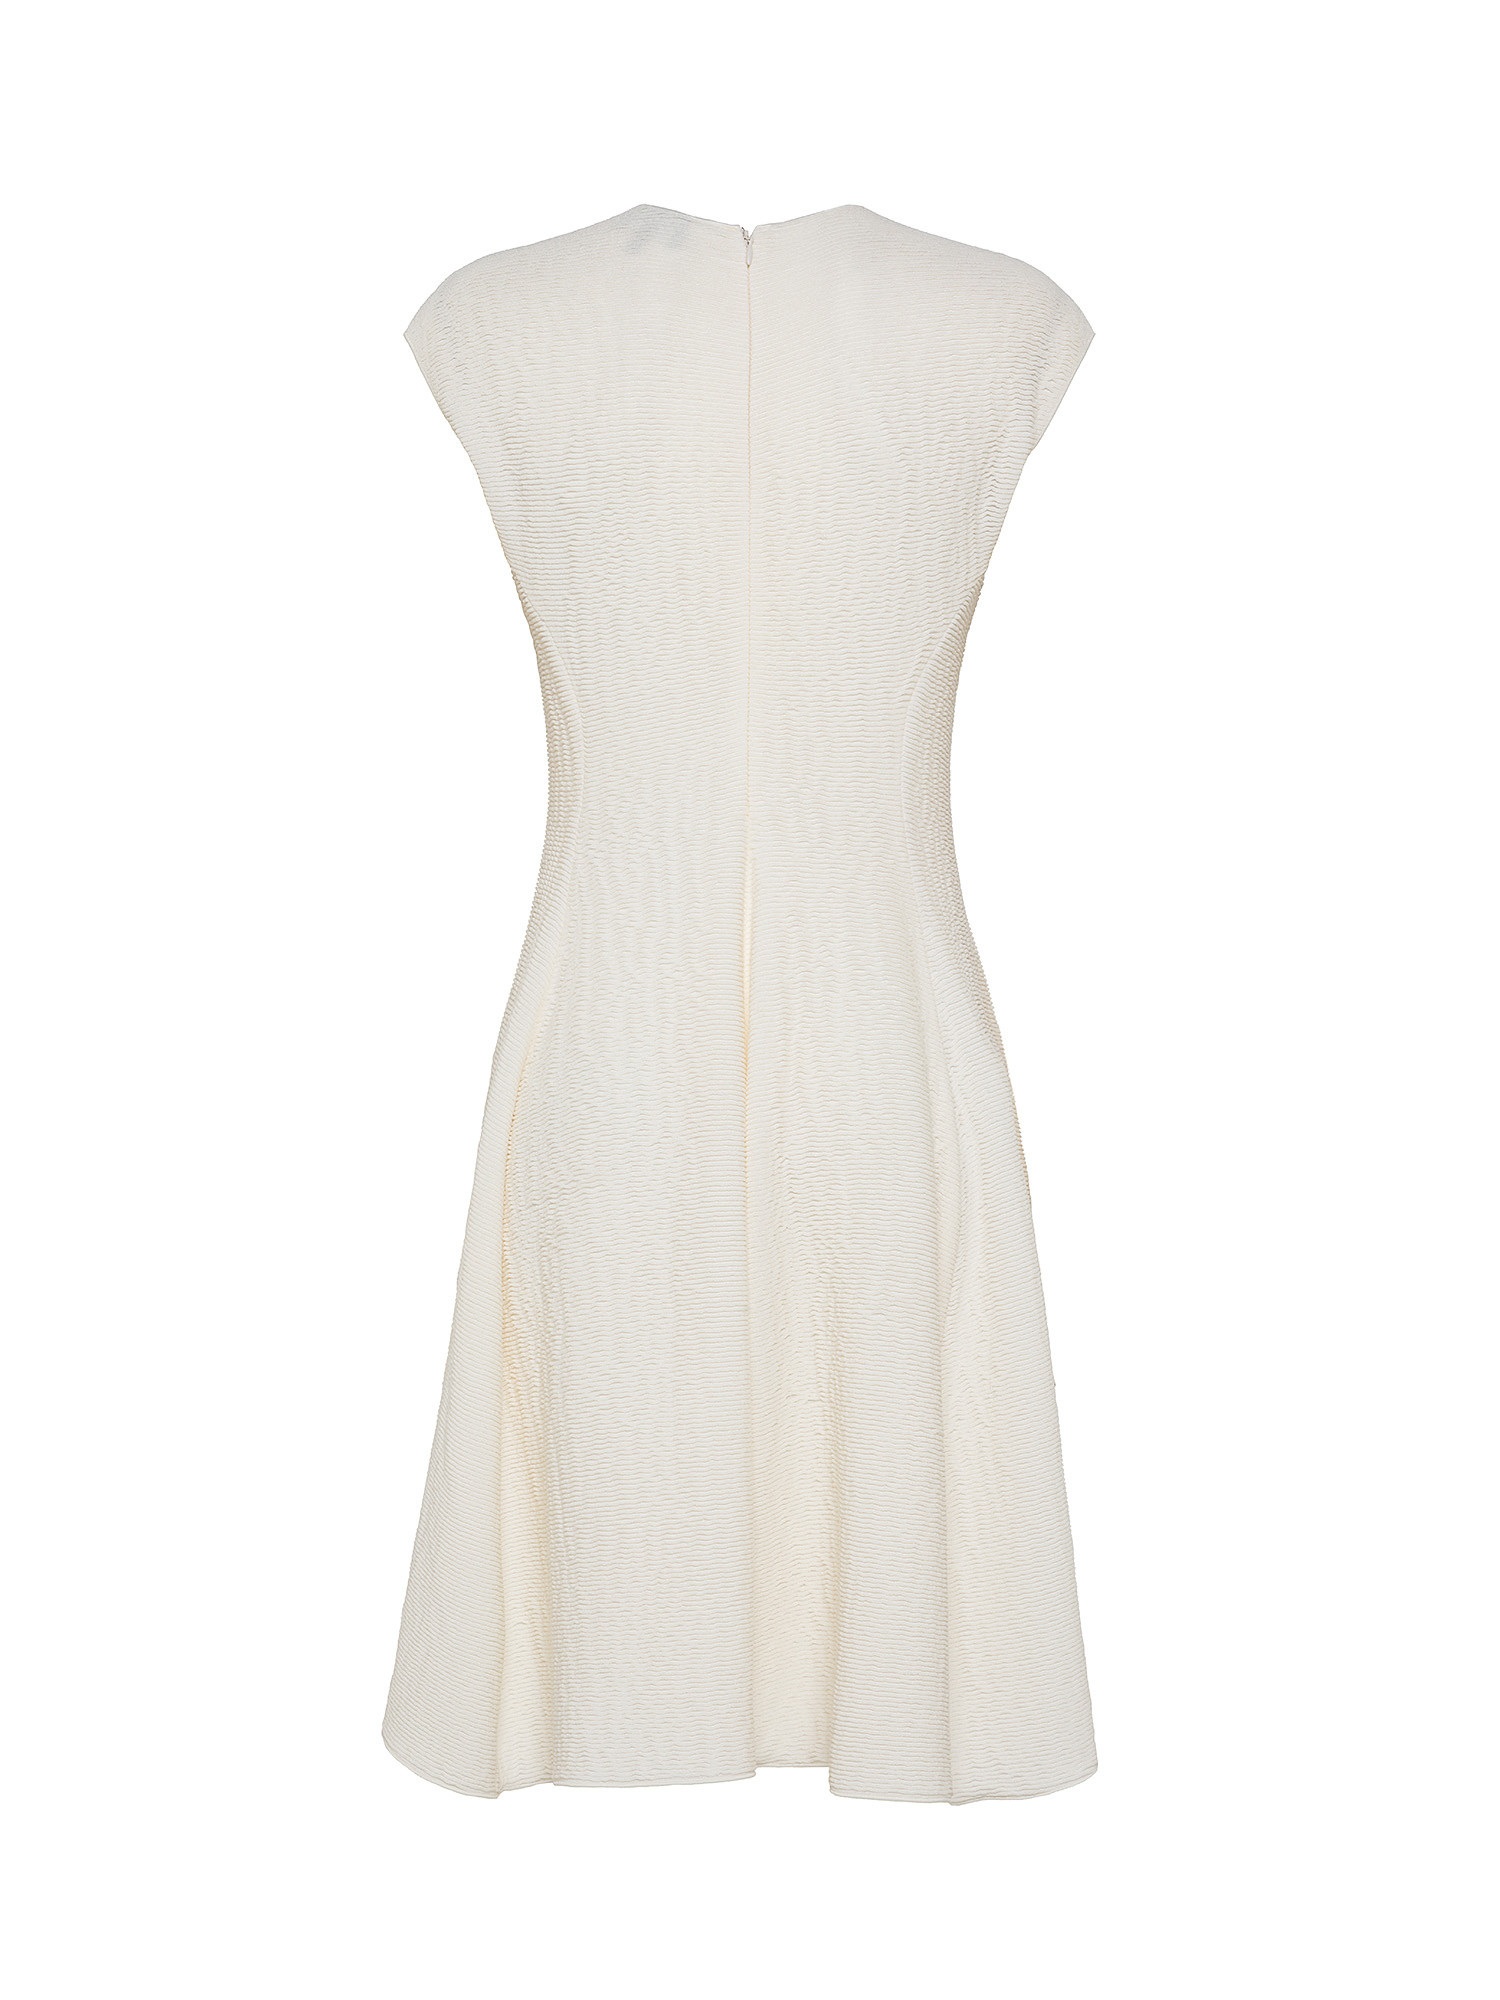 Emporio Armani - Knitted flared dress, White, large image number 1